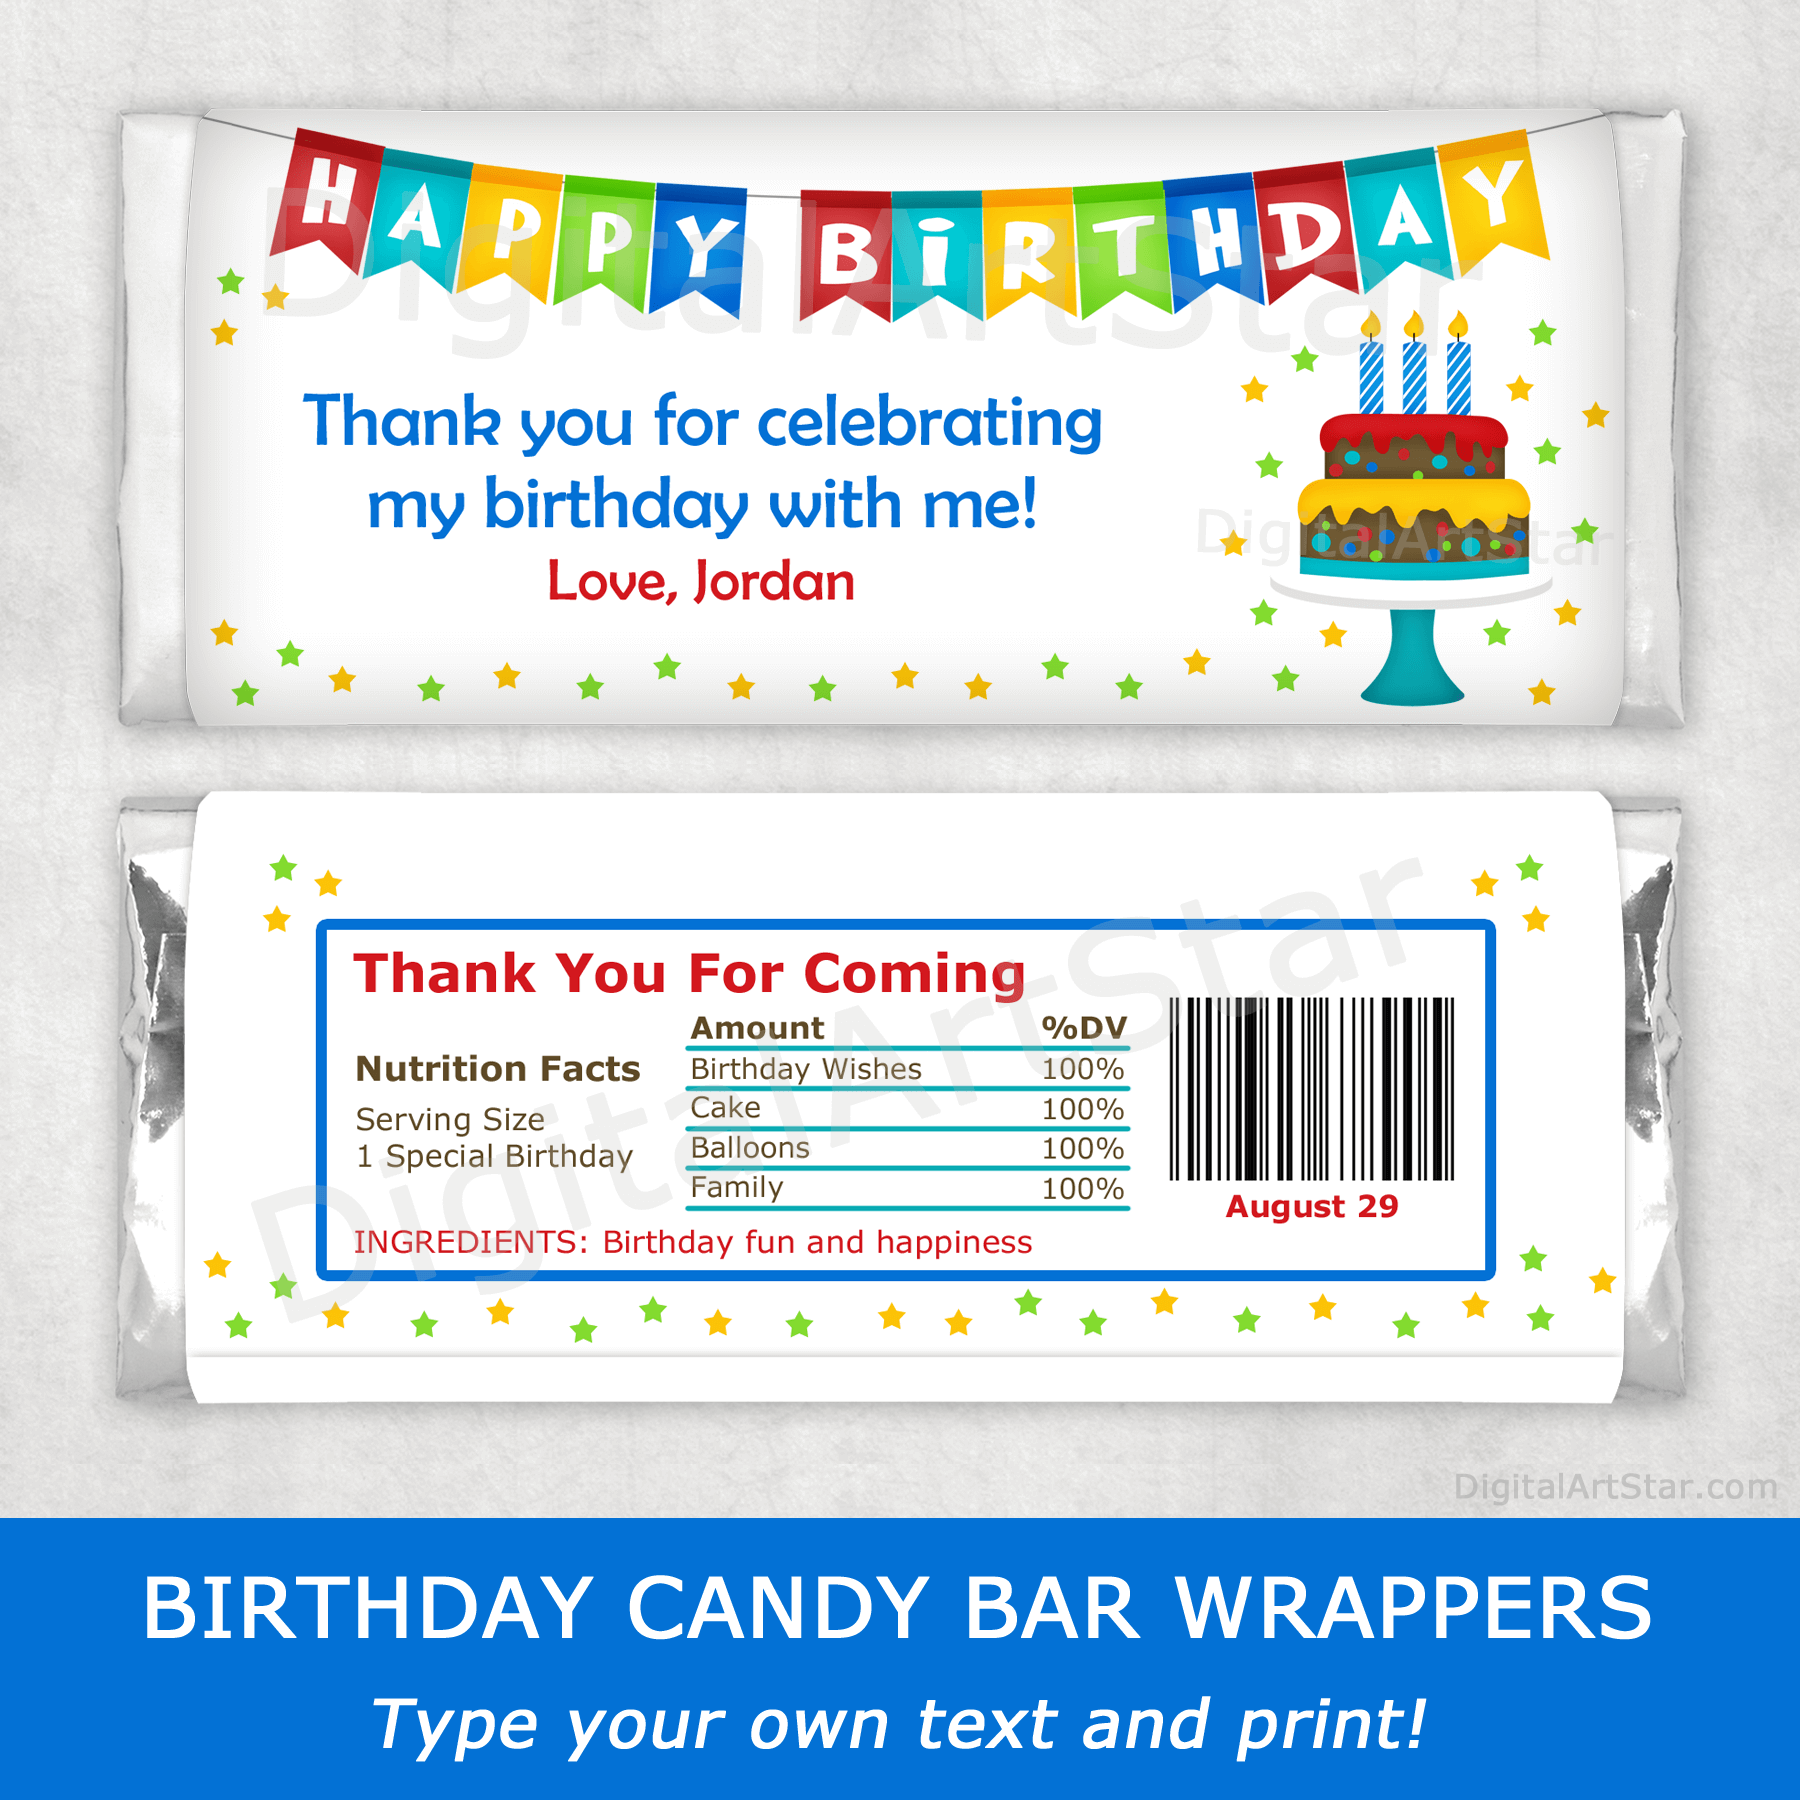 Happy Birthday Candy Bar Wrapper Template with Cake Image